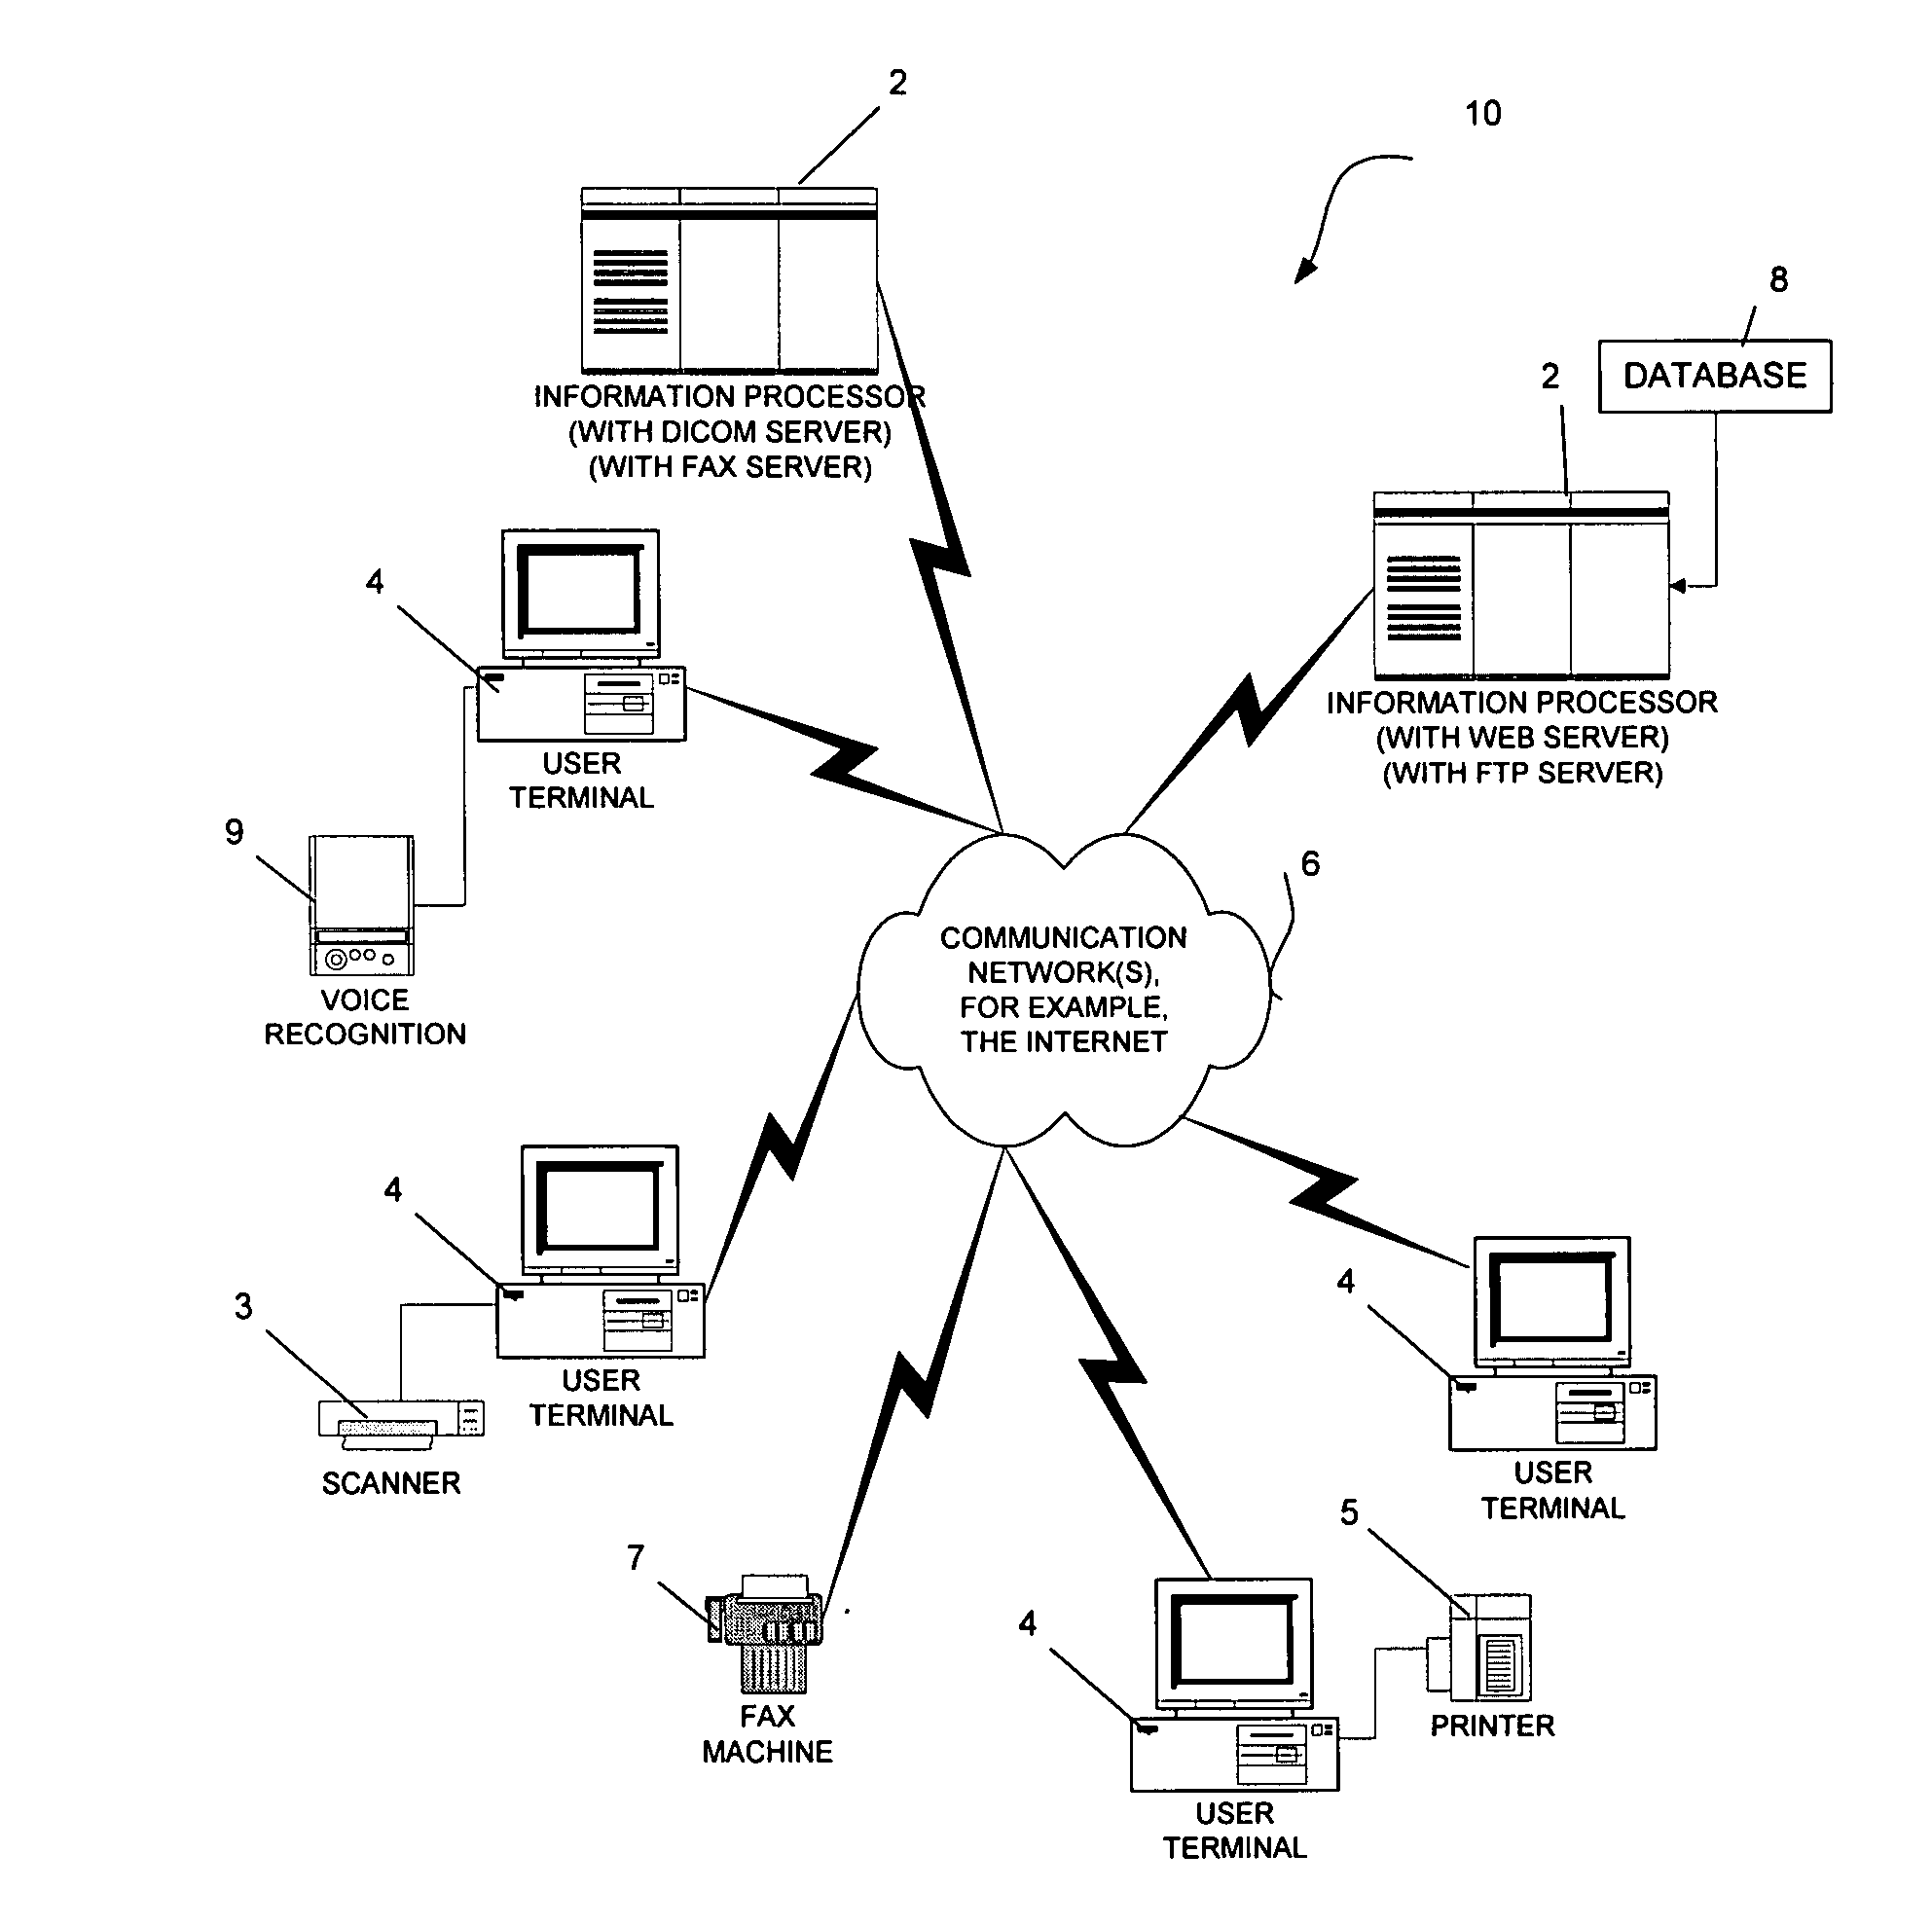 System and method for integrating ancillary data in DICOM image files